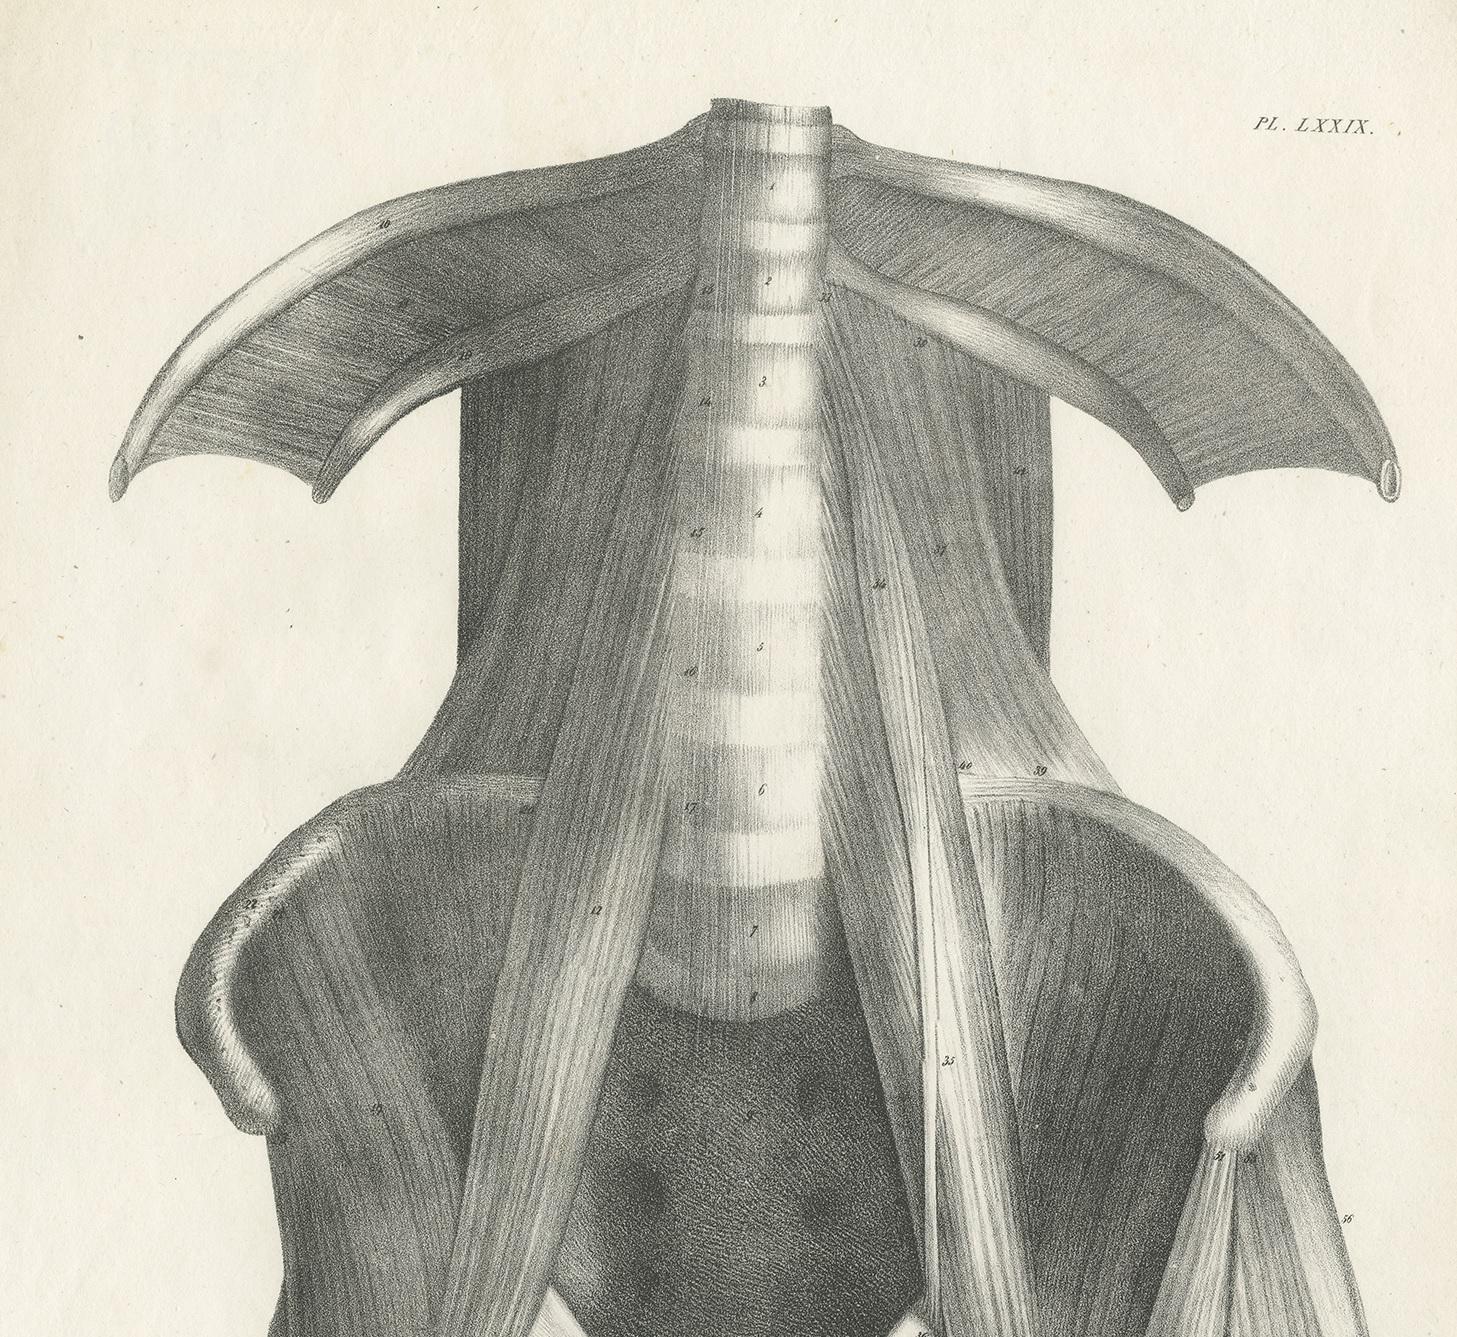 Pl. LXXIX Antique Anatomy / Medical Print of the Thigh by Cloquet '1821' In Good Condition For Sale In Langweer, NL